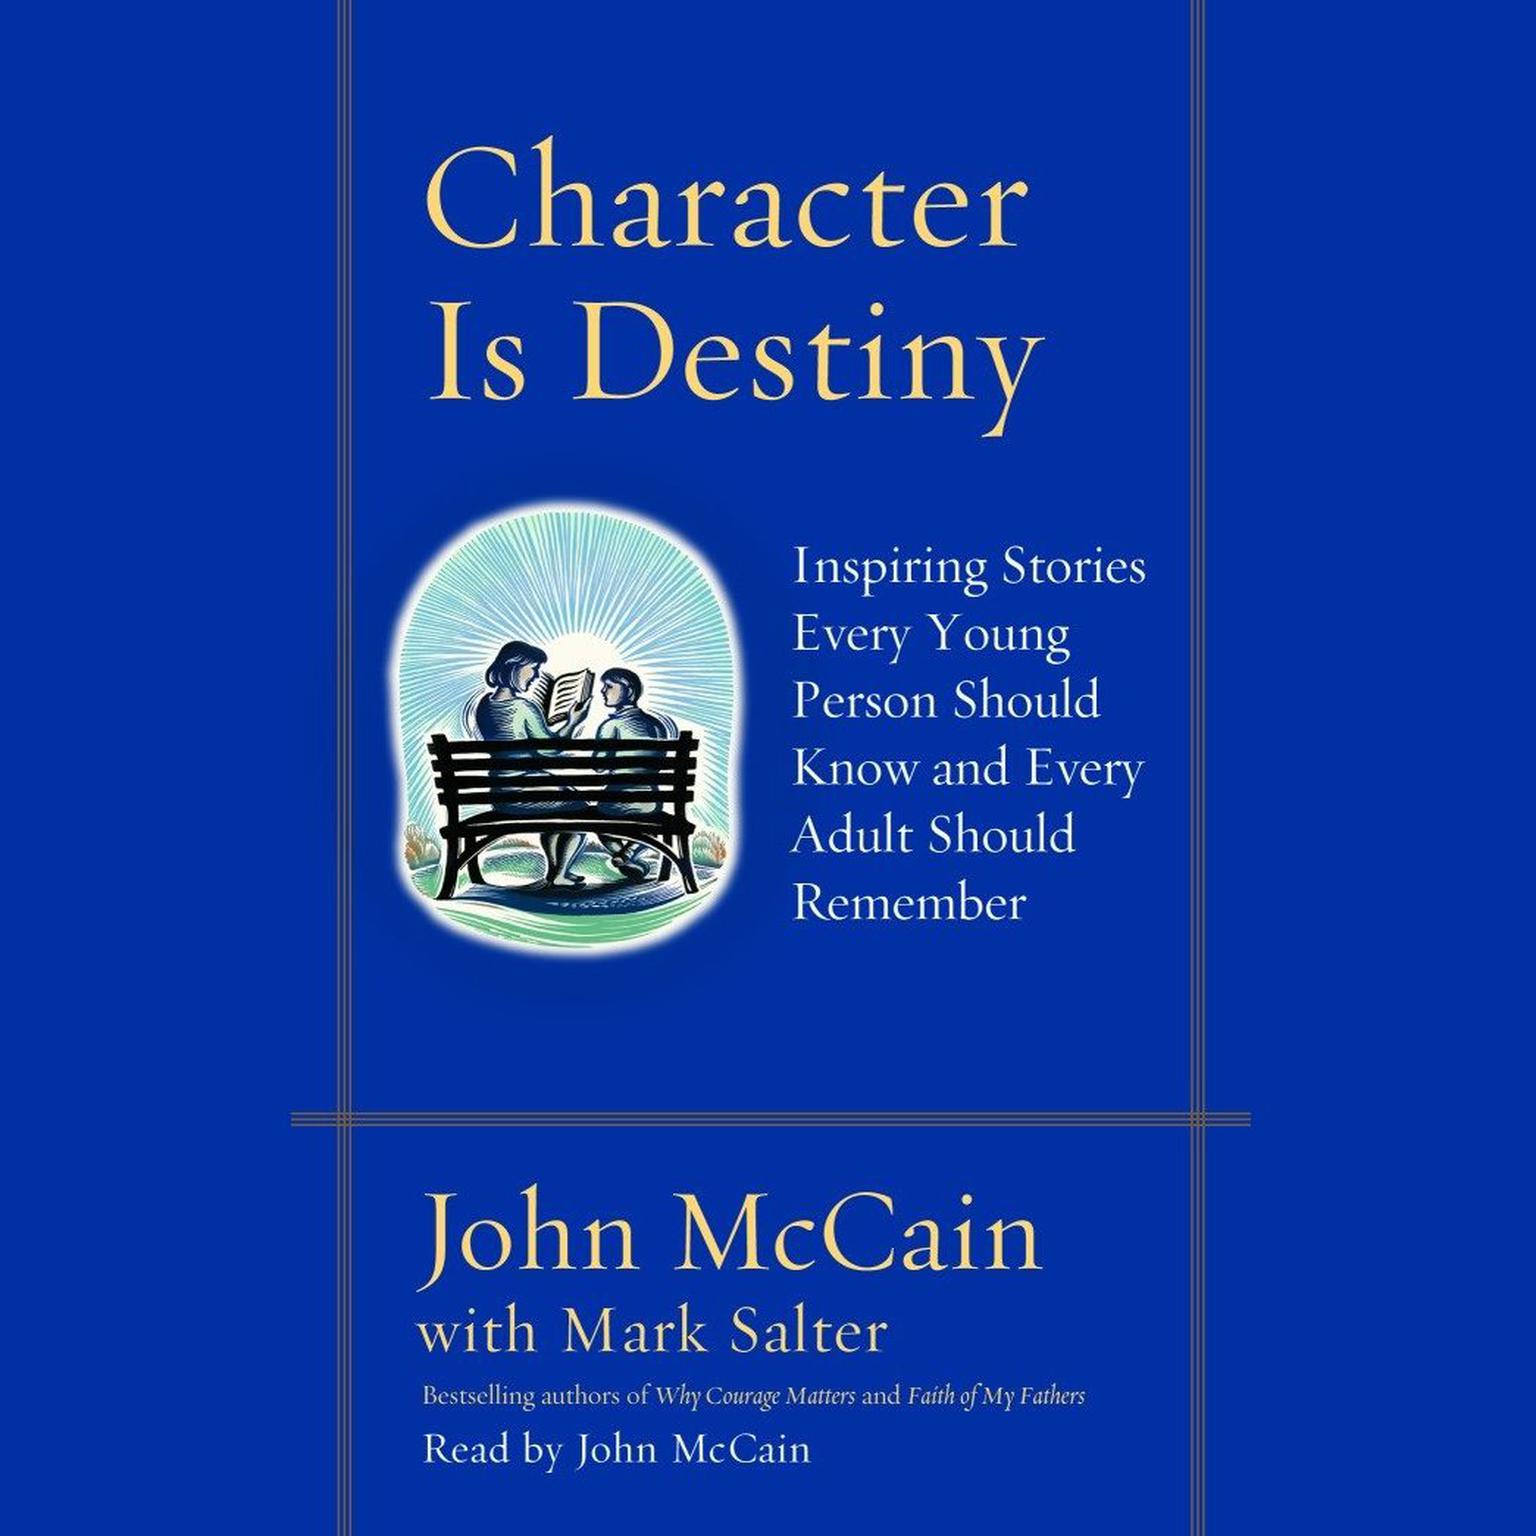 Character Is Destiny (Abridged): Inspiring Stories Every Young Person Should Know and Every Adult Should Remember Audiobook, by John McCain